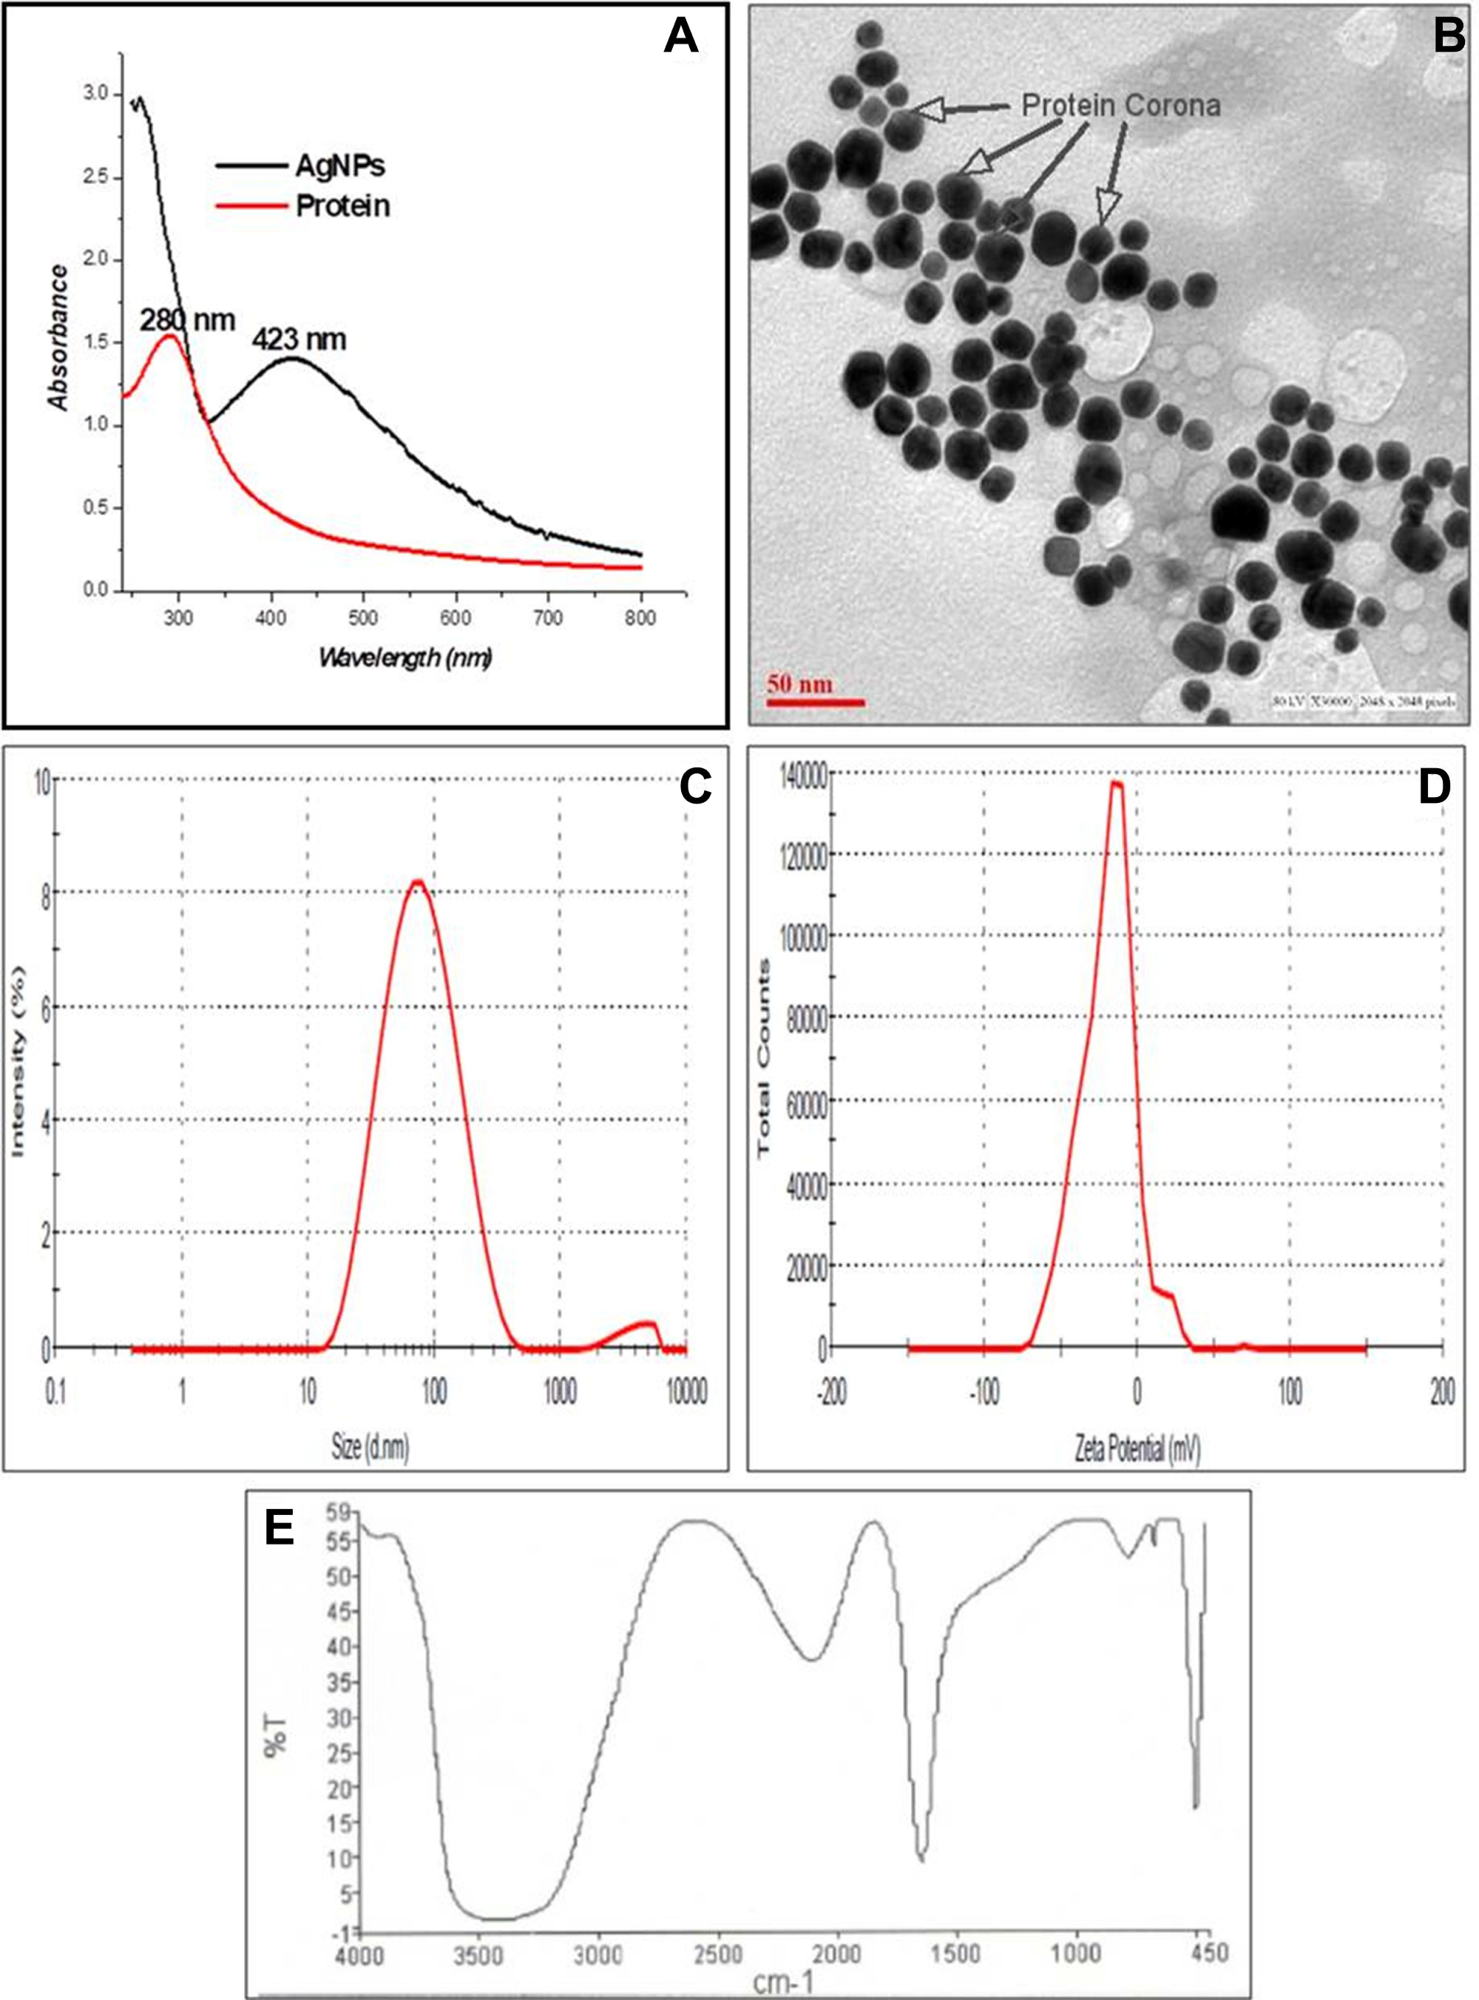 Characterization of B. hispida fruit proteins mediated synthesis of AgNPs by physical techniques: (A) UV-visible spectrum, (B) TEM Micrograph with light gray protein Corona mark by an arrow, (C) size distribution by DLS (D) zeta potential (E) surface characterization by FTIR spectrum.